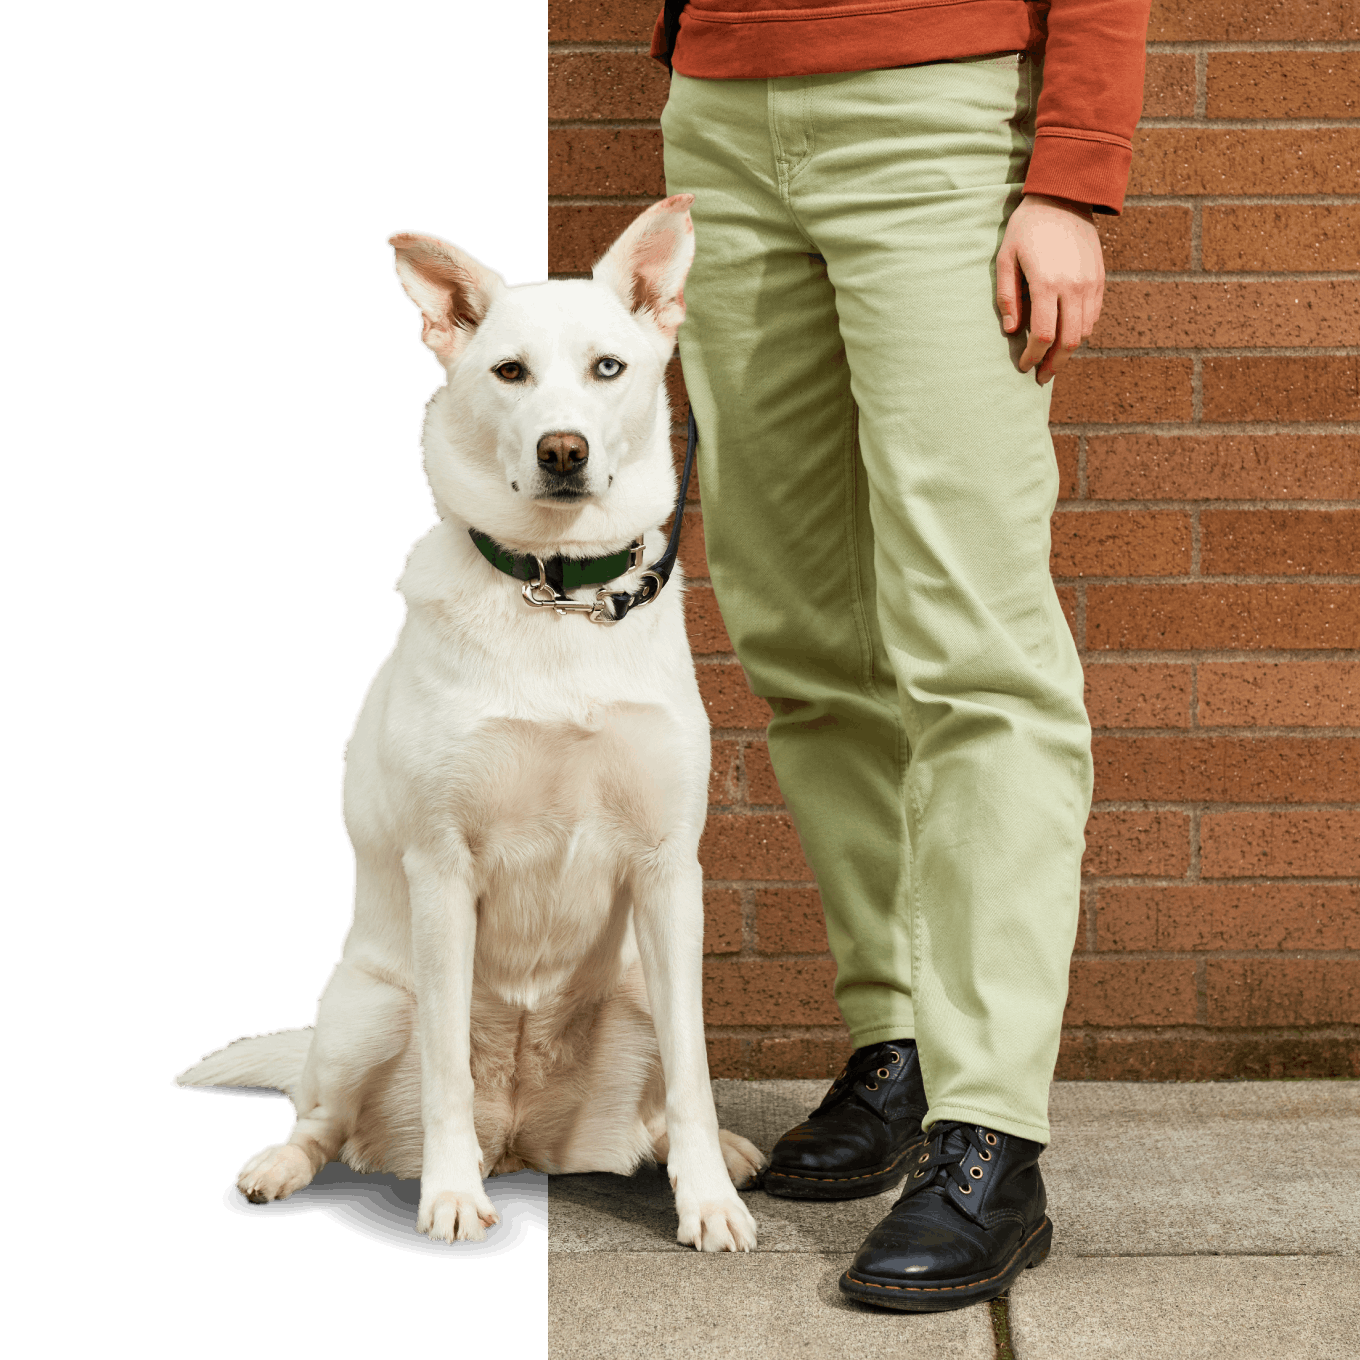 A white dog stands next to a person and looks at camera.